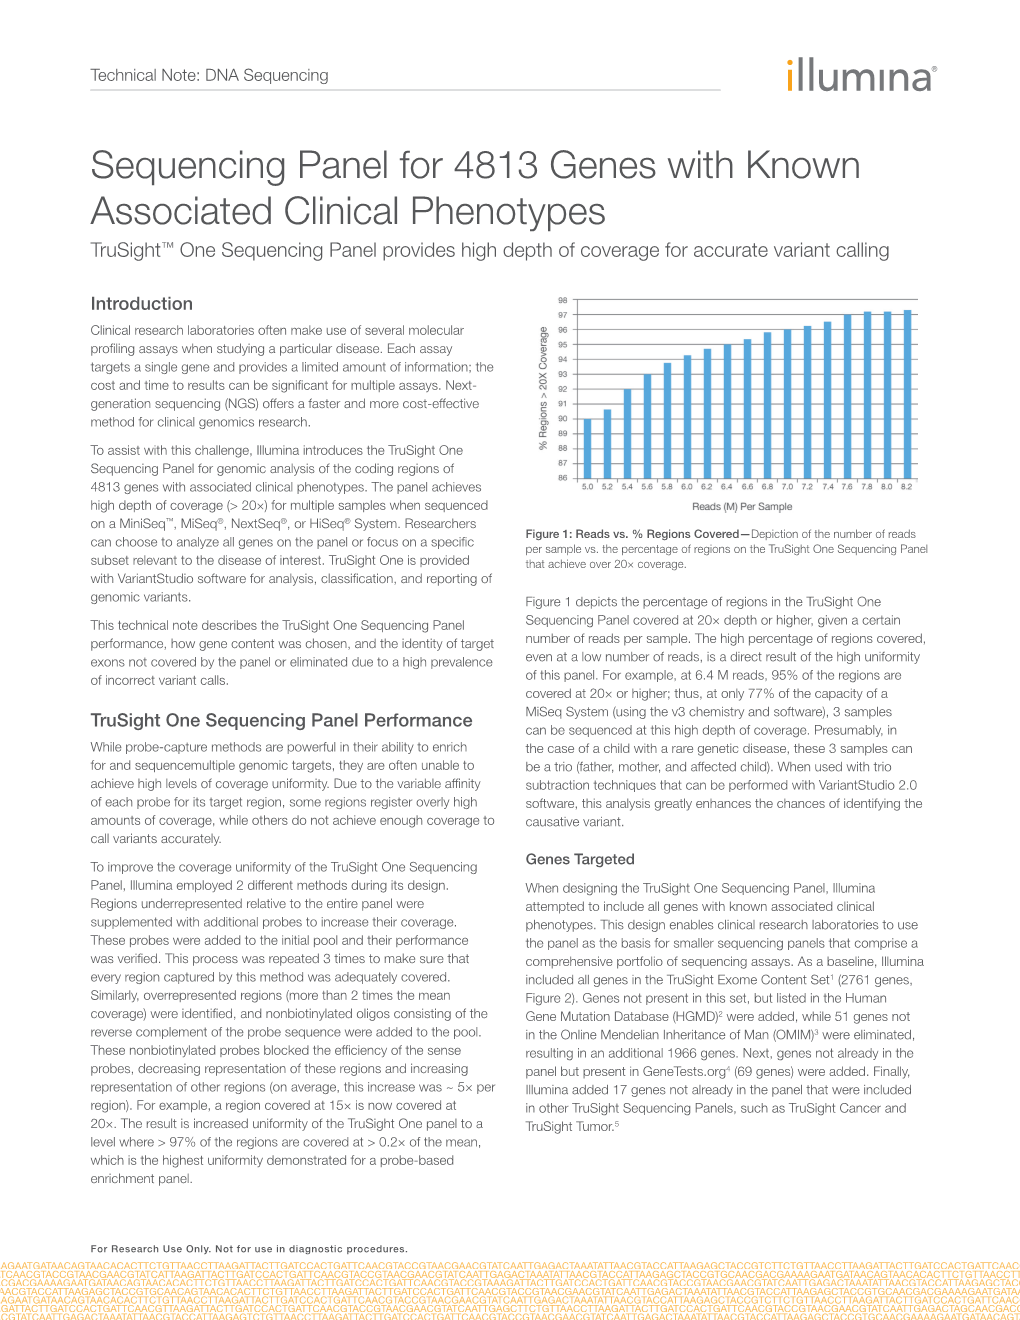 Sequencing Panel for 4813 Genes with Known Associated Clinical Phenotypes Trusight™ One Sequencing Panel Provides High Depth of Coverage for Accurate Variant Calling